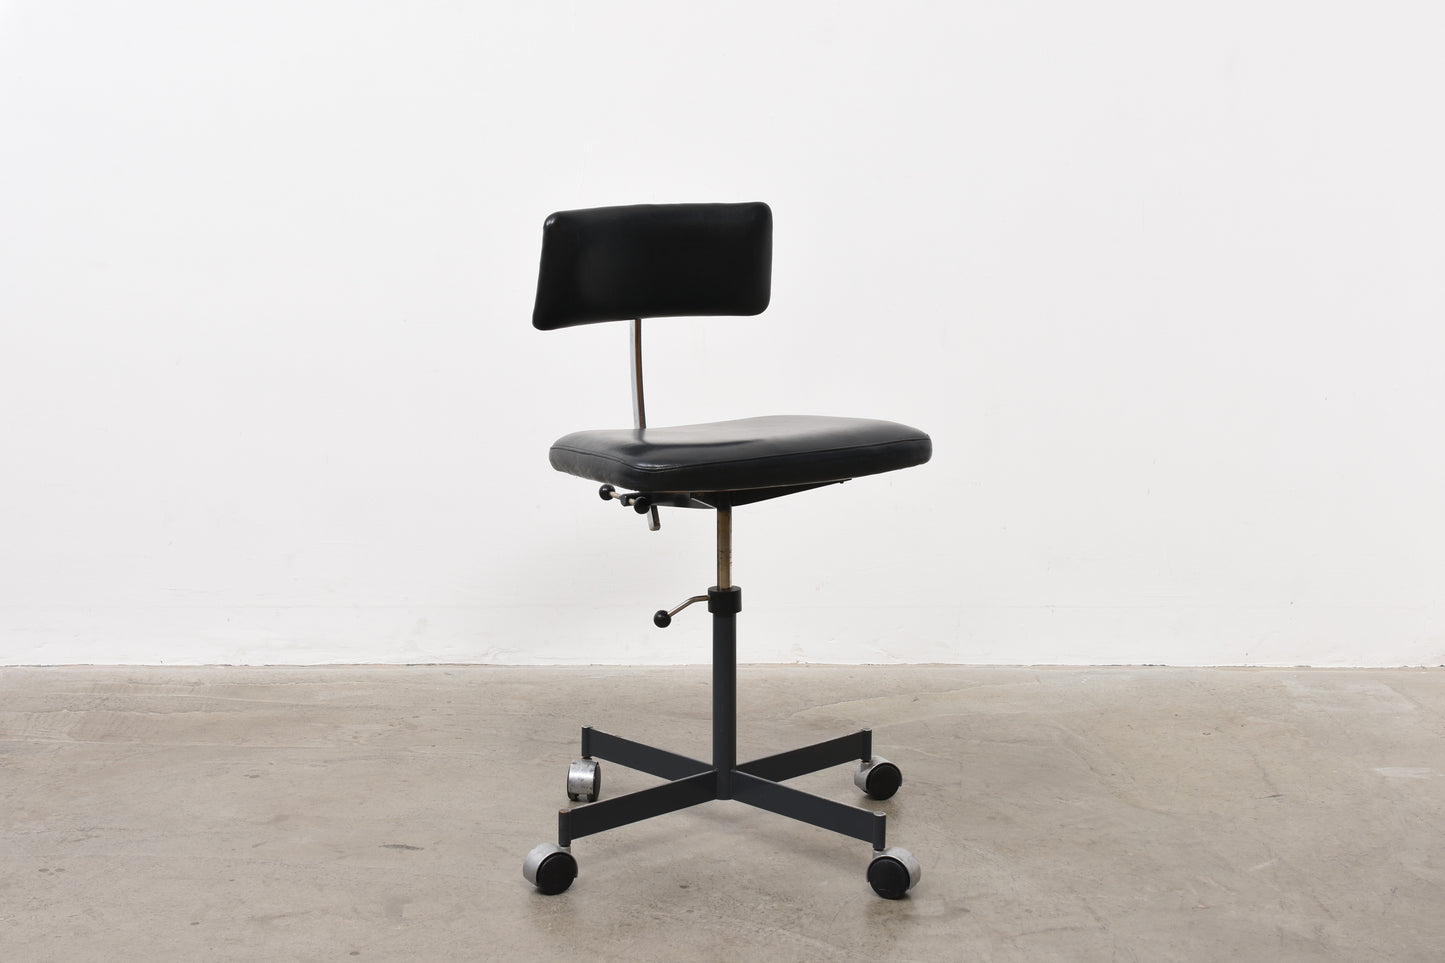 1960s task chair by KEVI